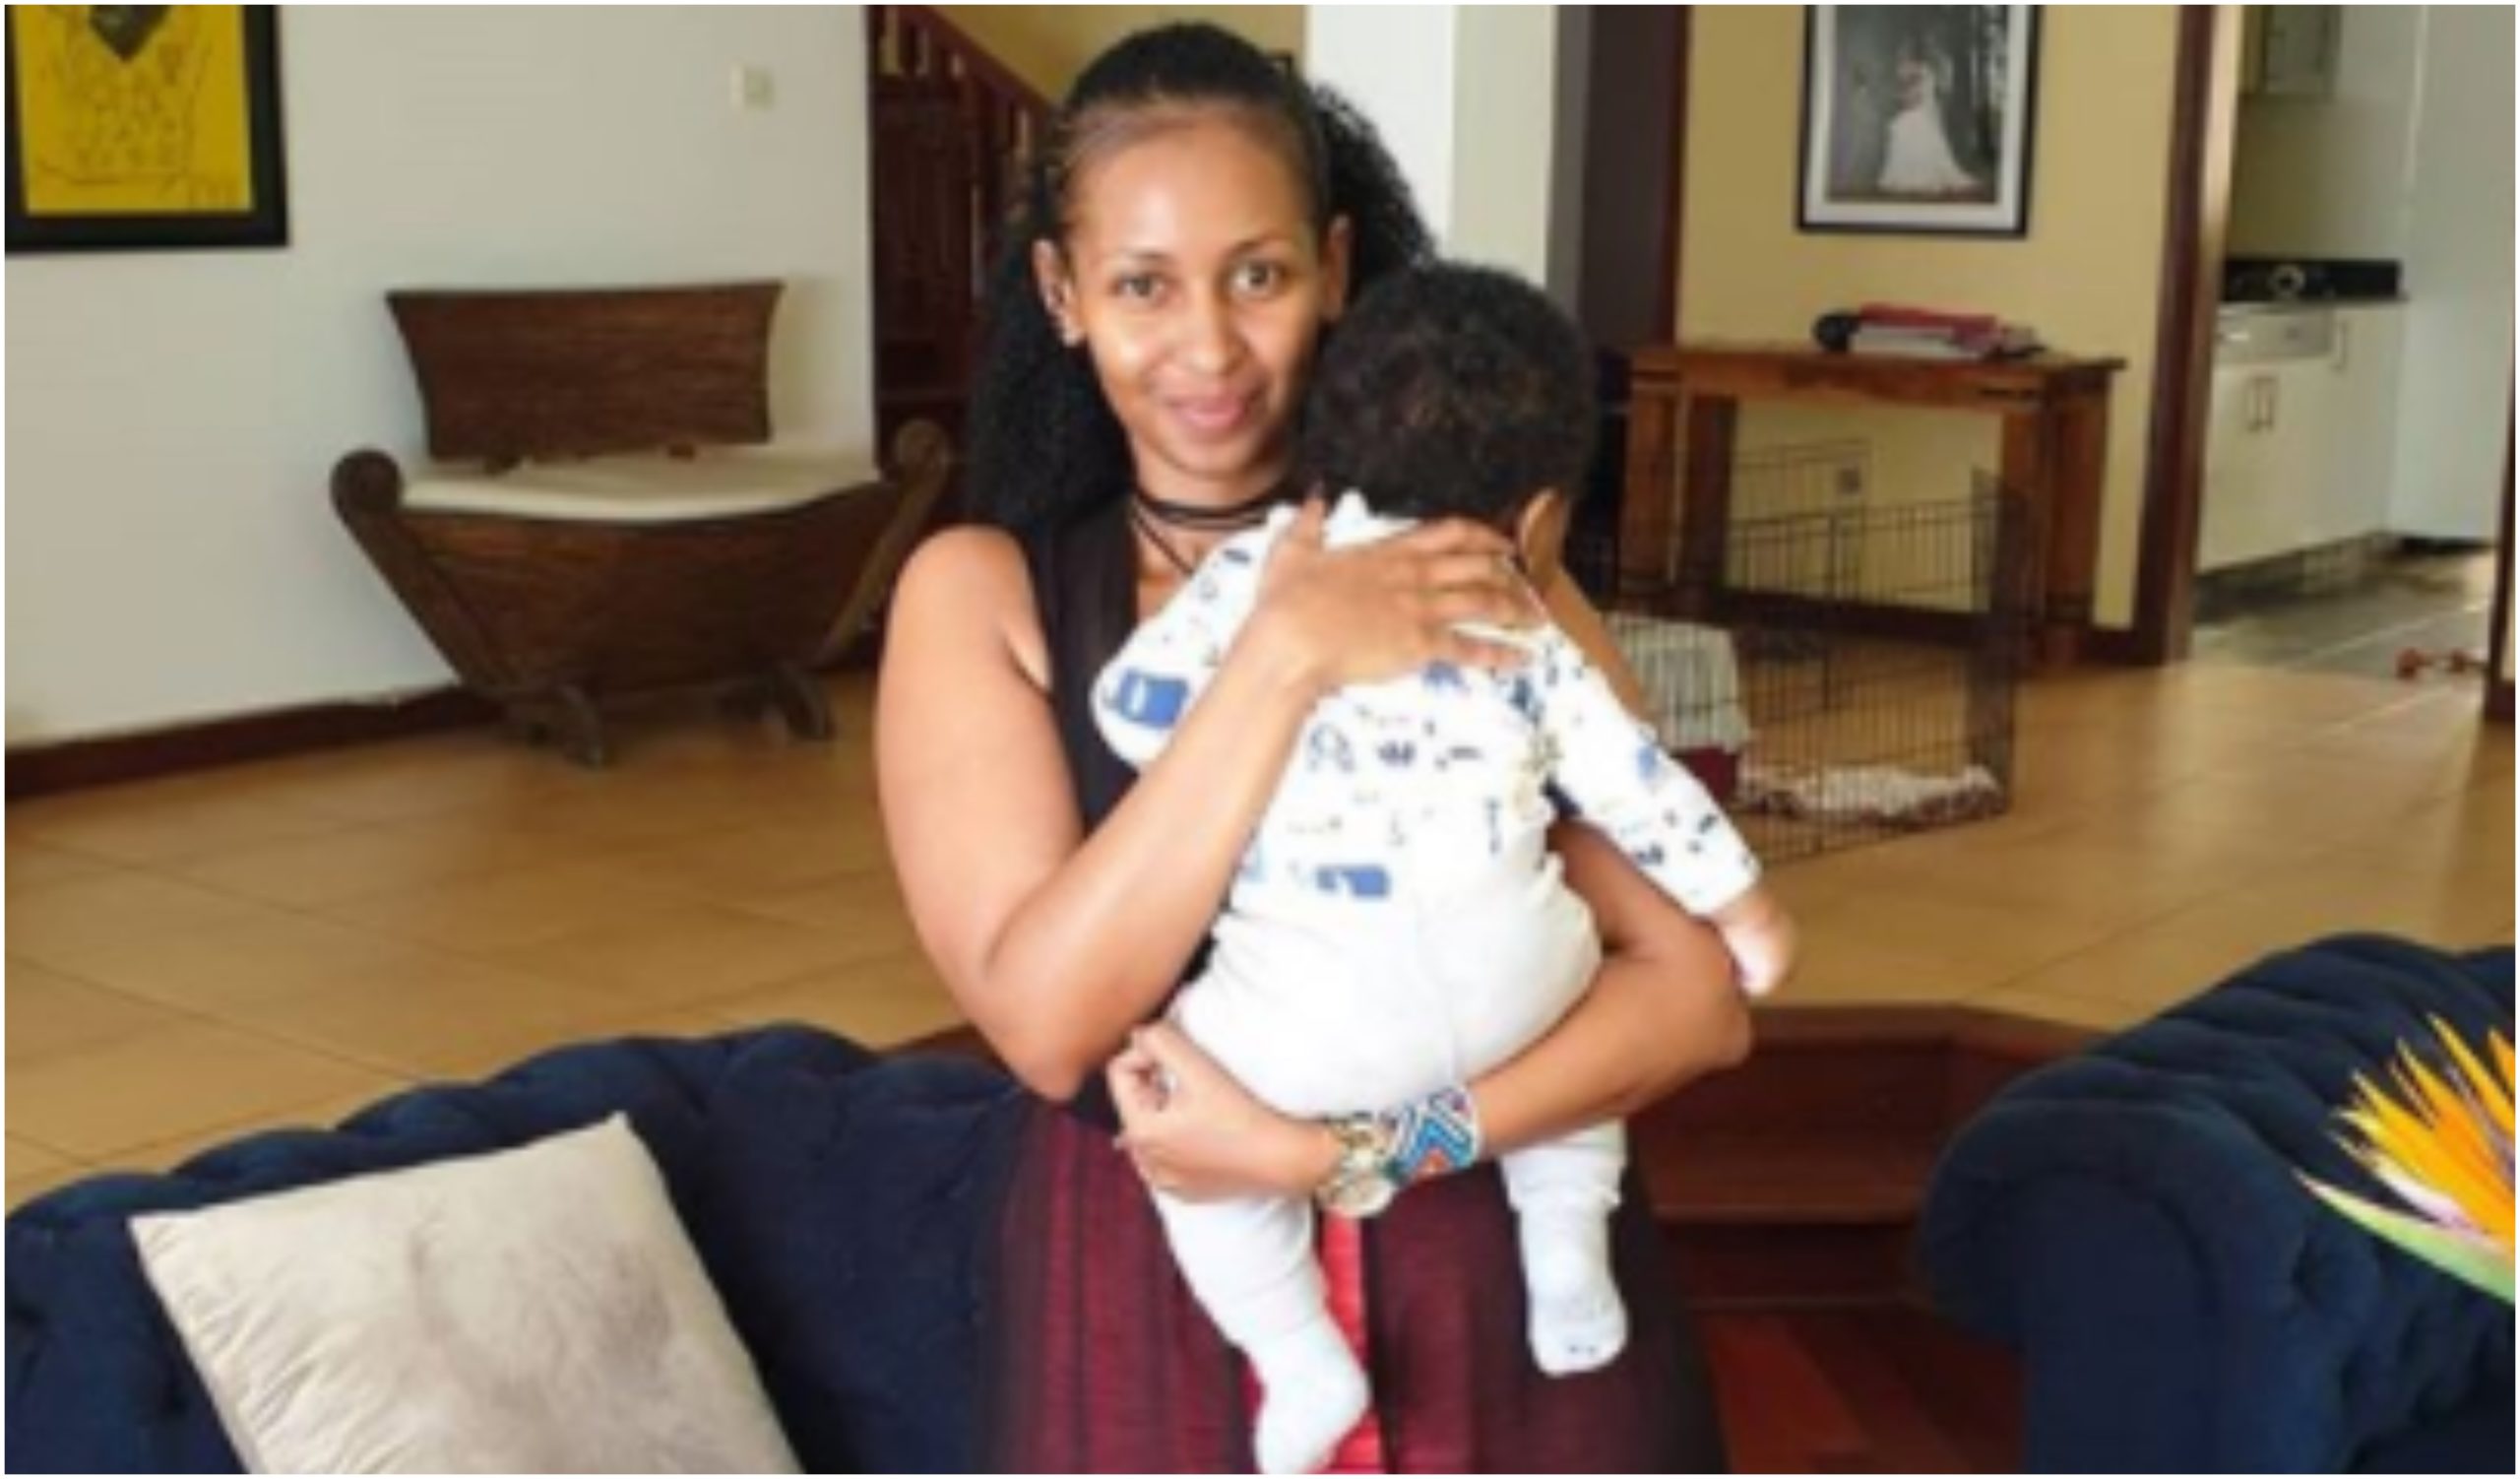 Sarah Hassan opens up on long traumatic experience breastfeeding her young son